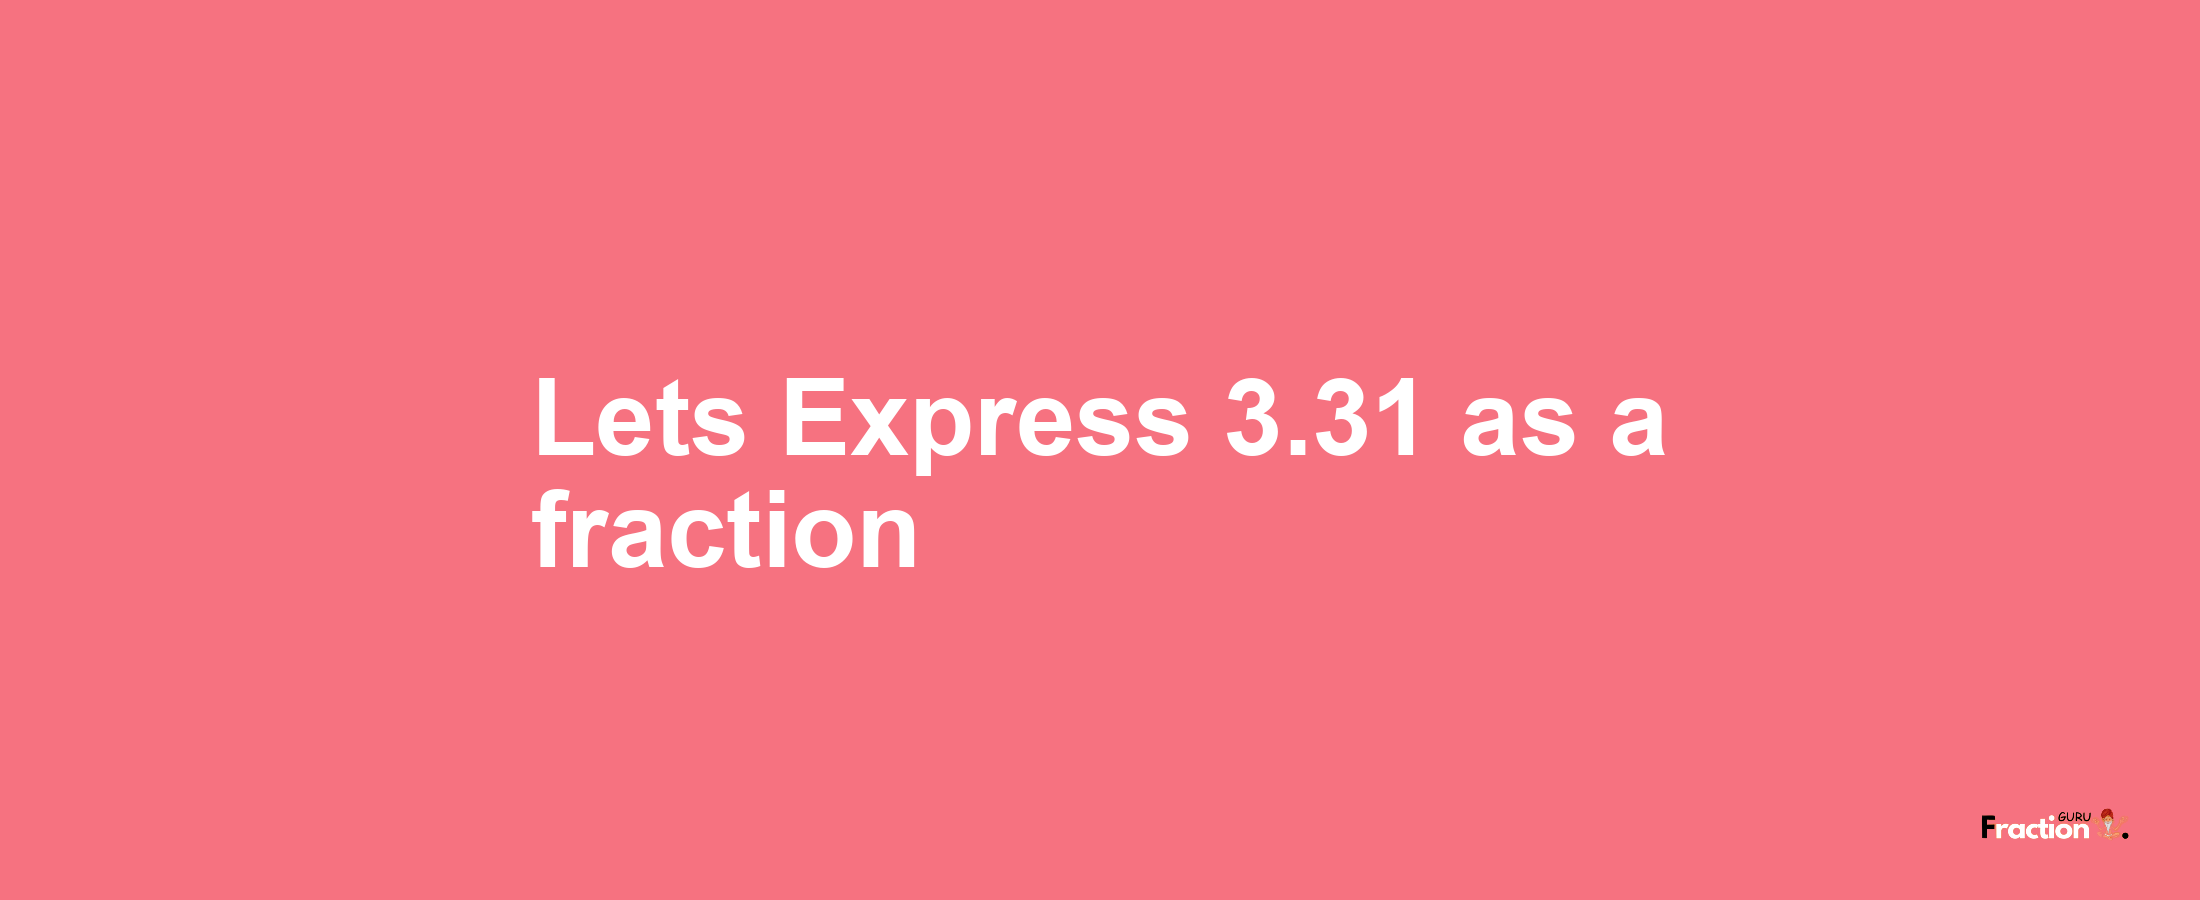 Lets Express 3.31 as afraction